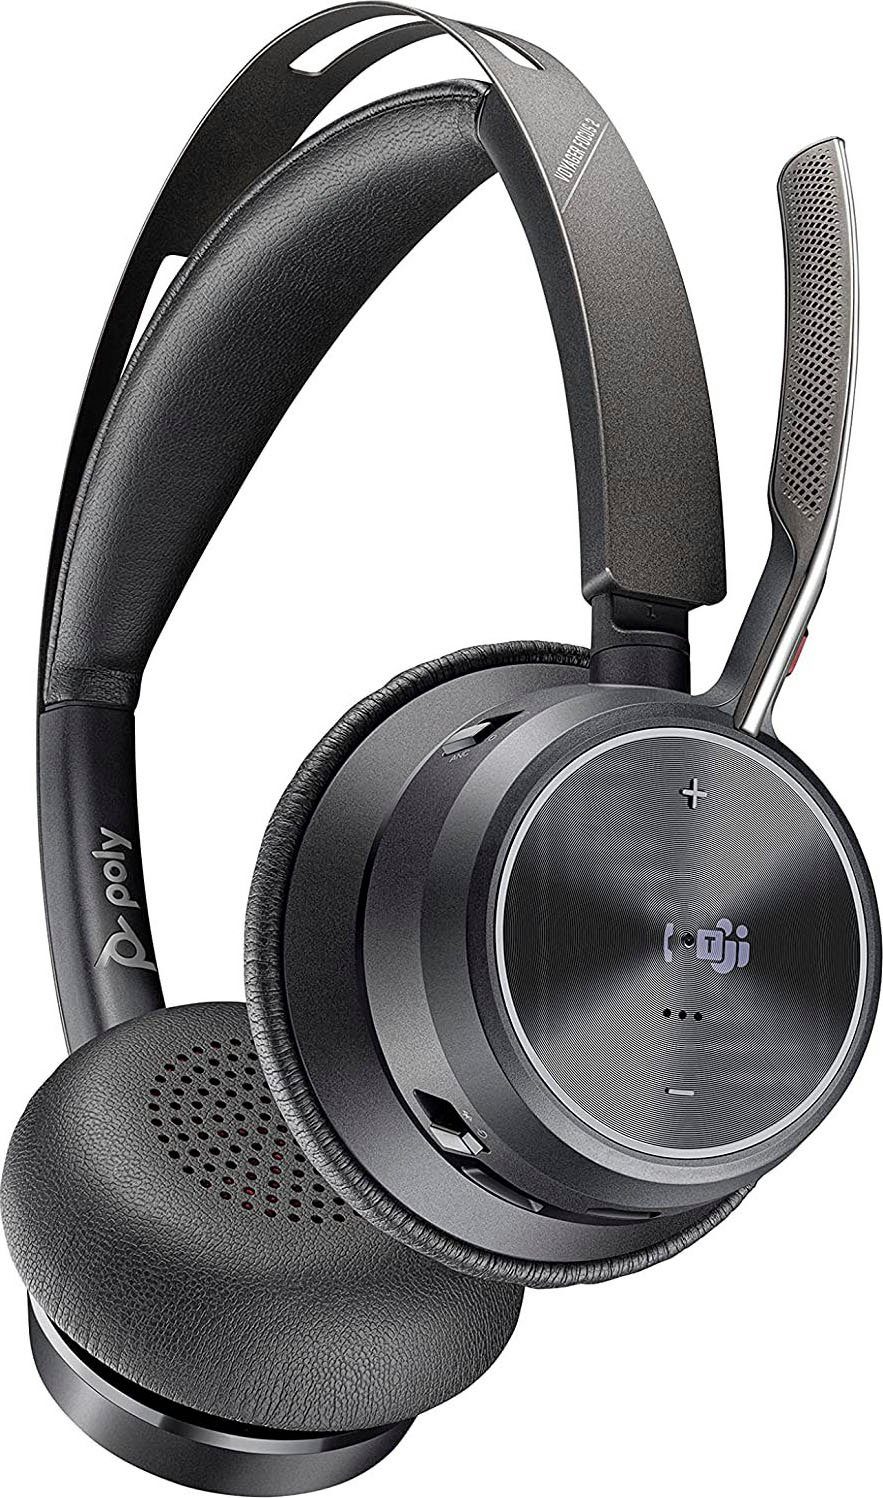 Poly Voyager Focus (Noise-Cancelling, Wireless-Headset UC Bluetooth)